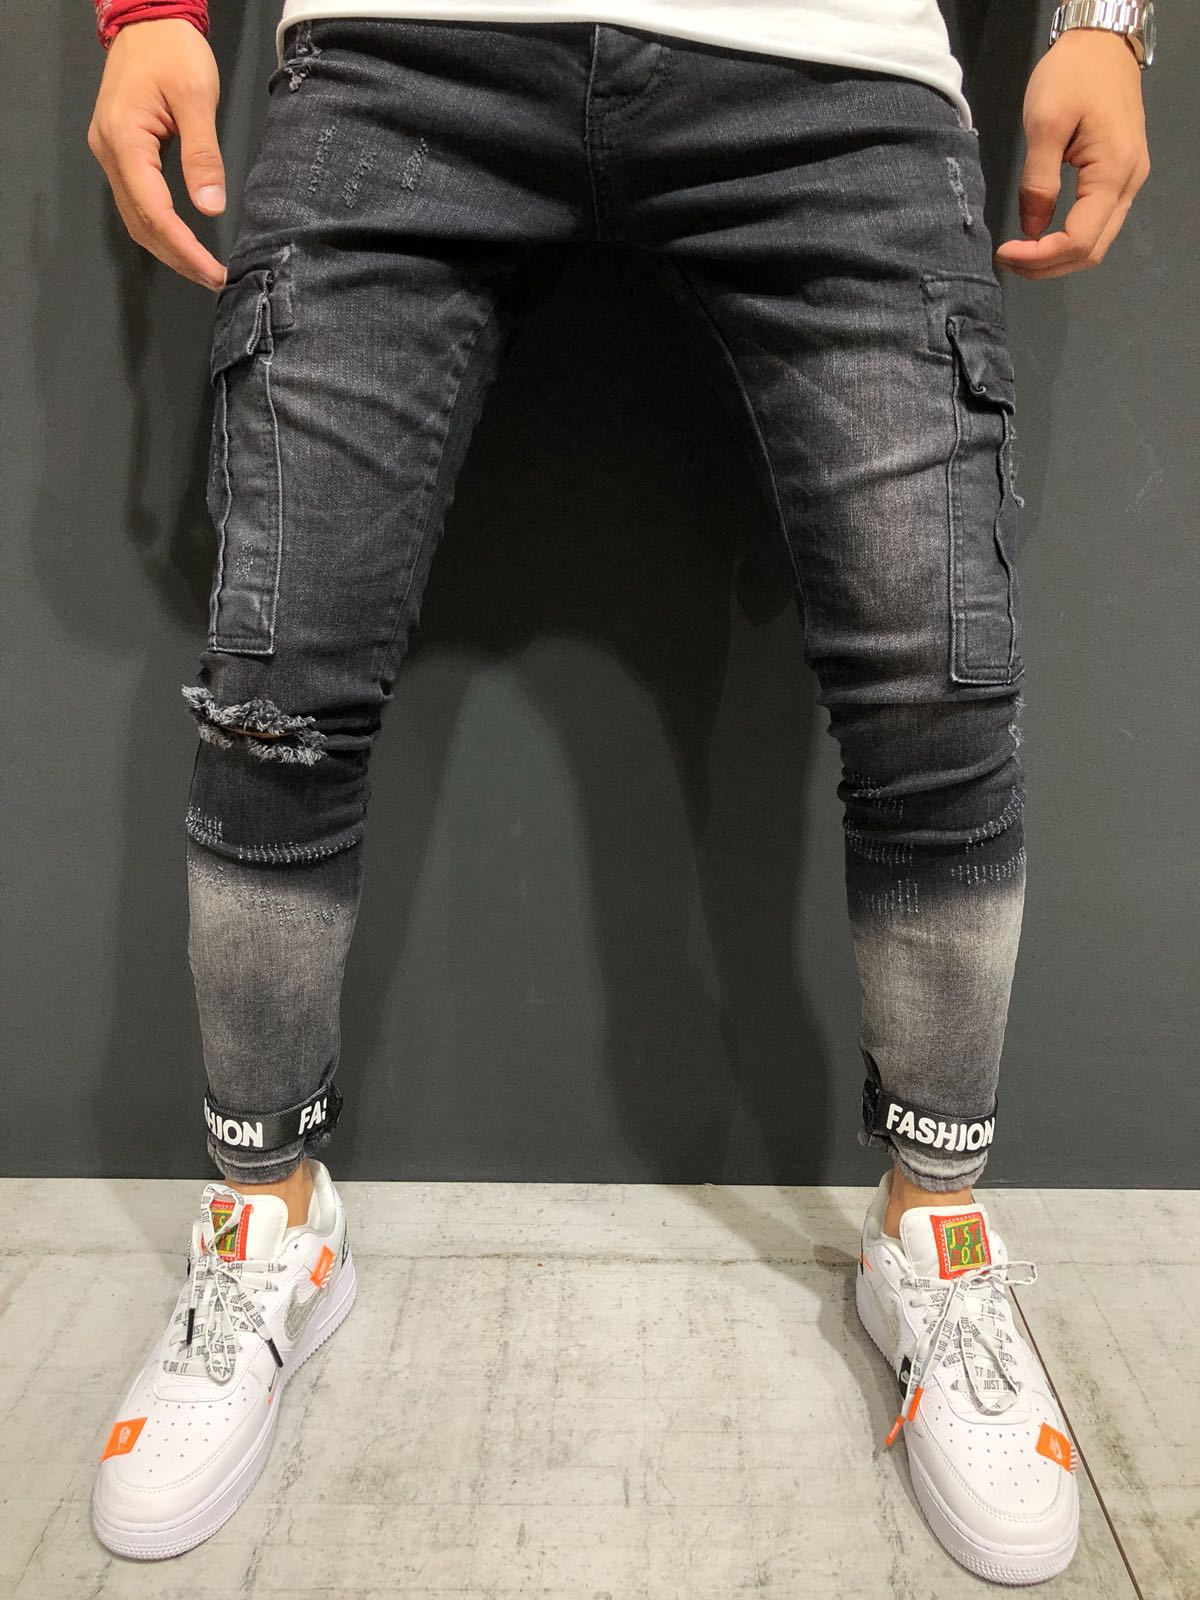 Stretchable Jeans For Men-Deluxe Fashion Forever